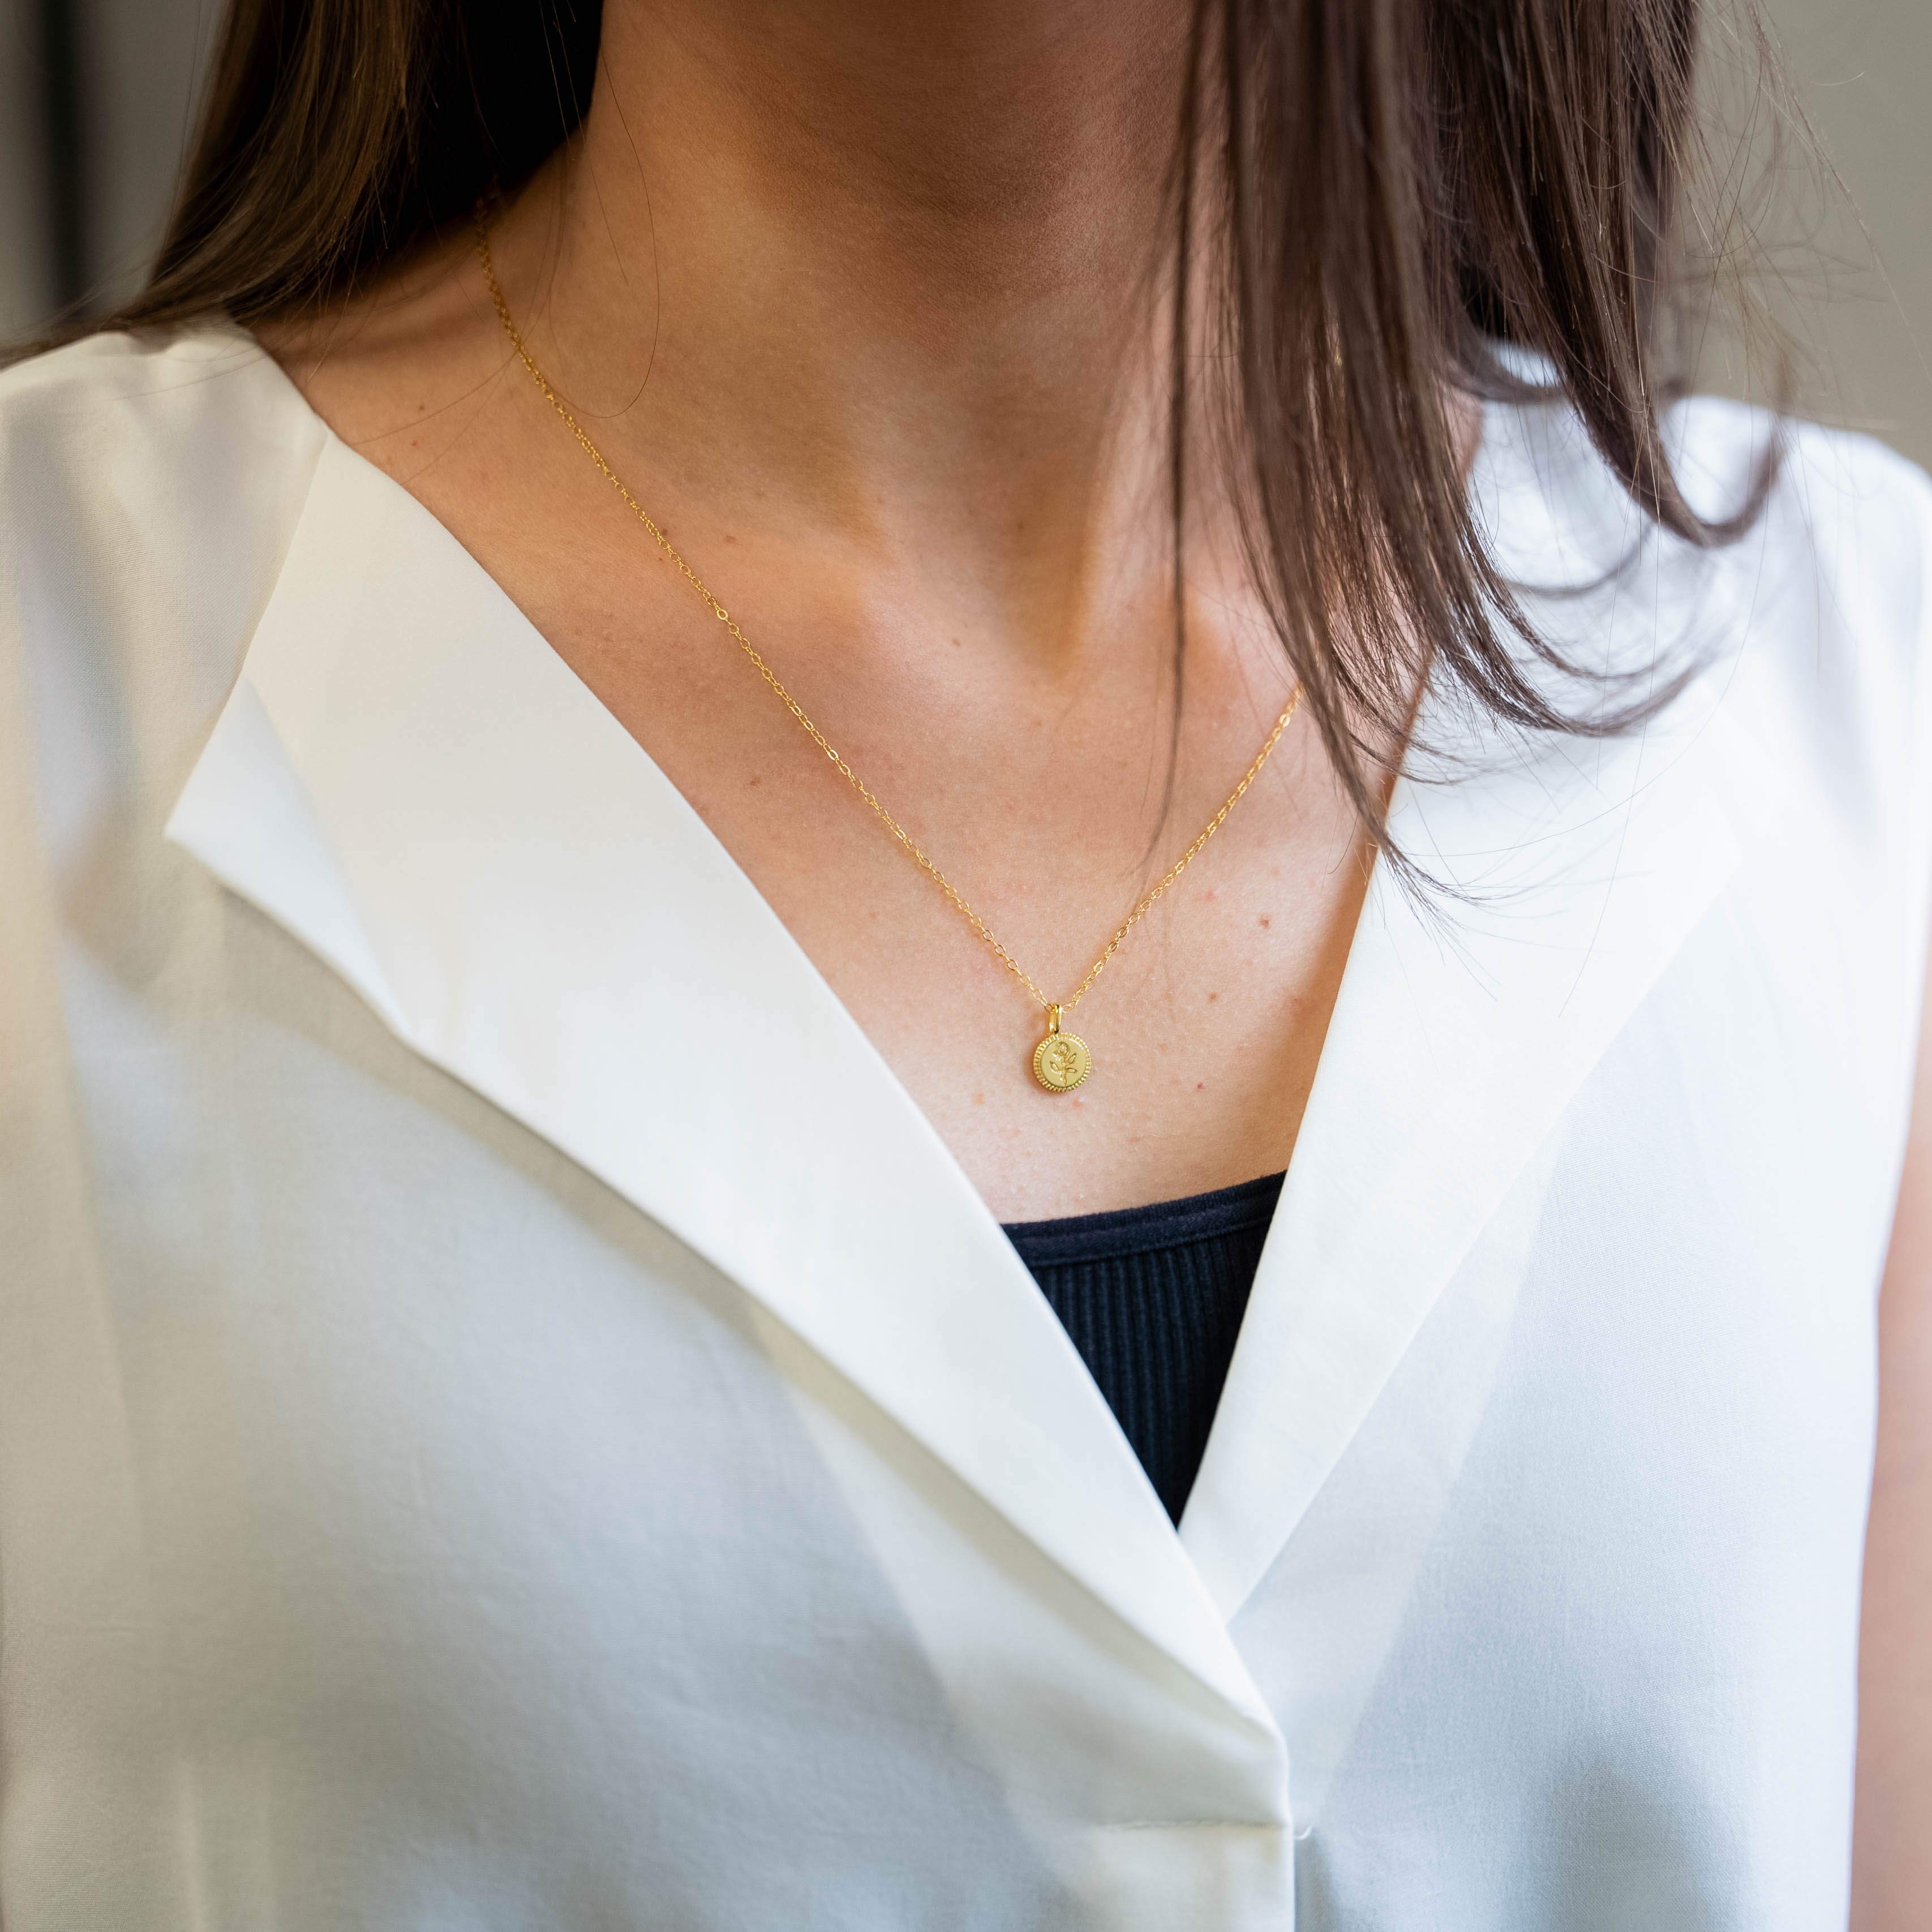 a woman wearing a white shirt and a gold necklace